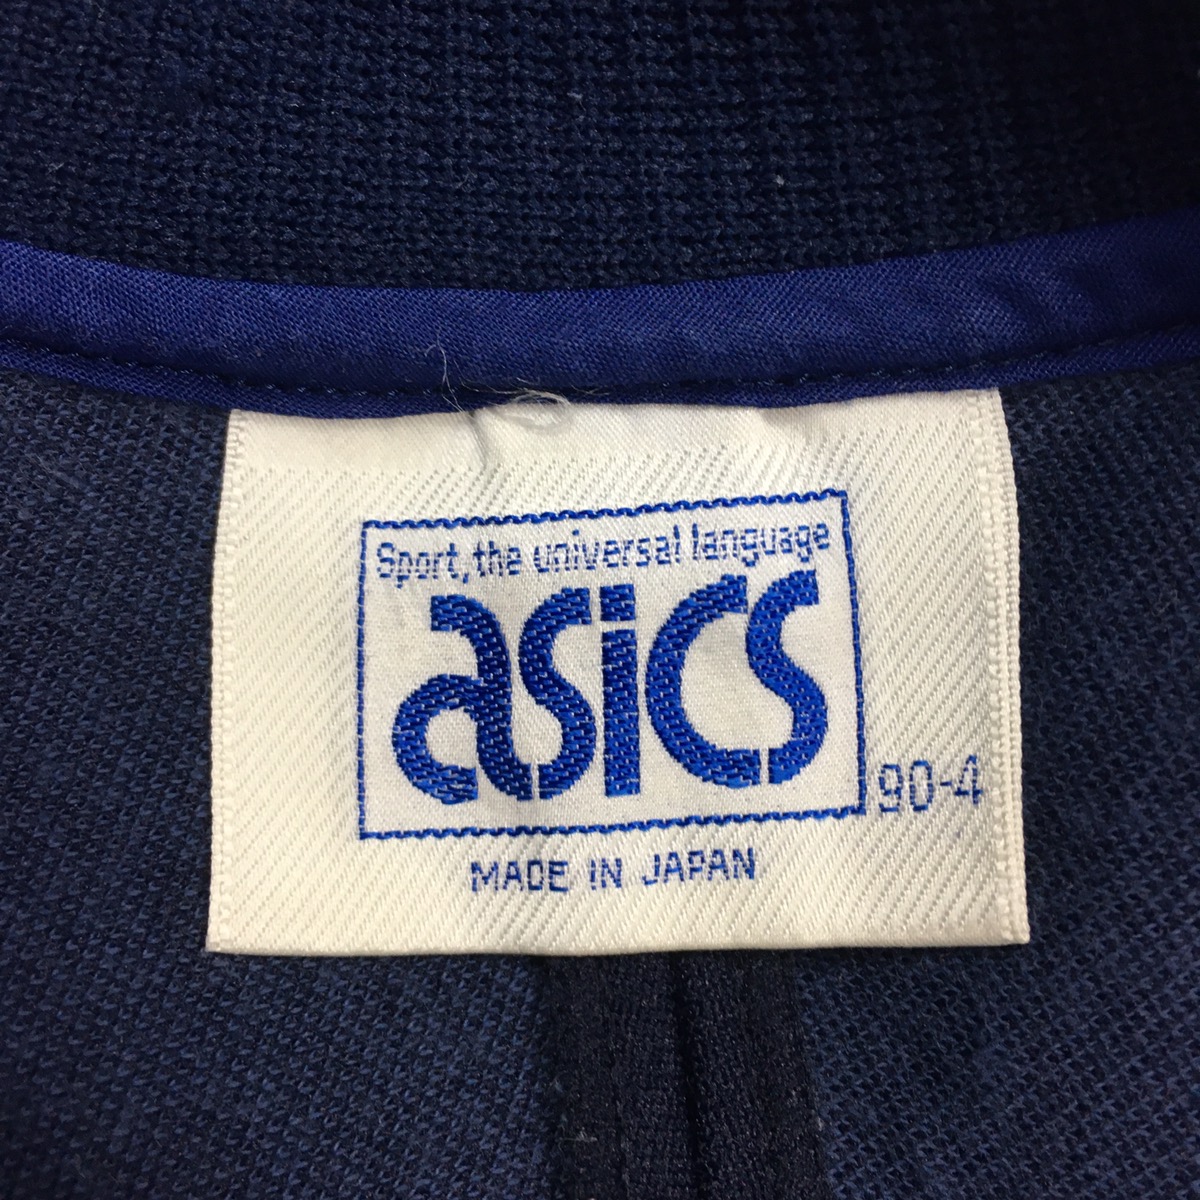 ASICS Zip Up Sweater Streetwear Clothing Made in Japan - 8